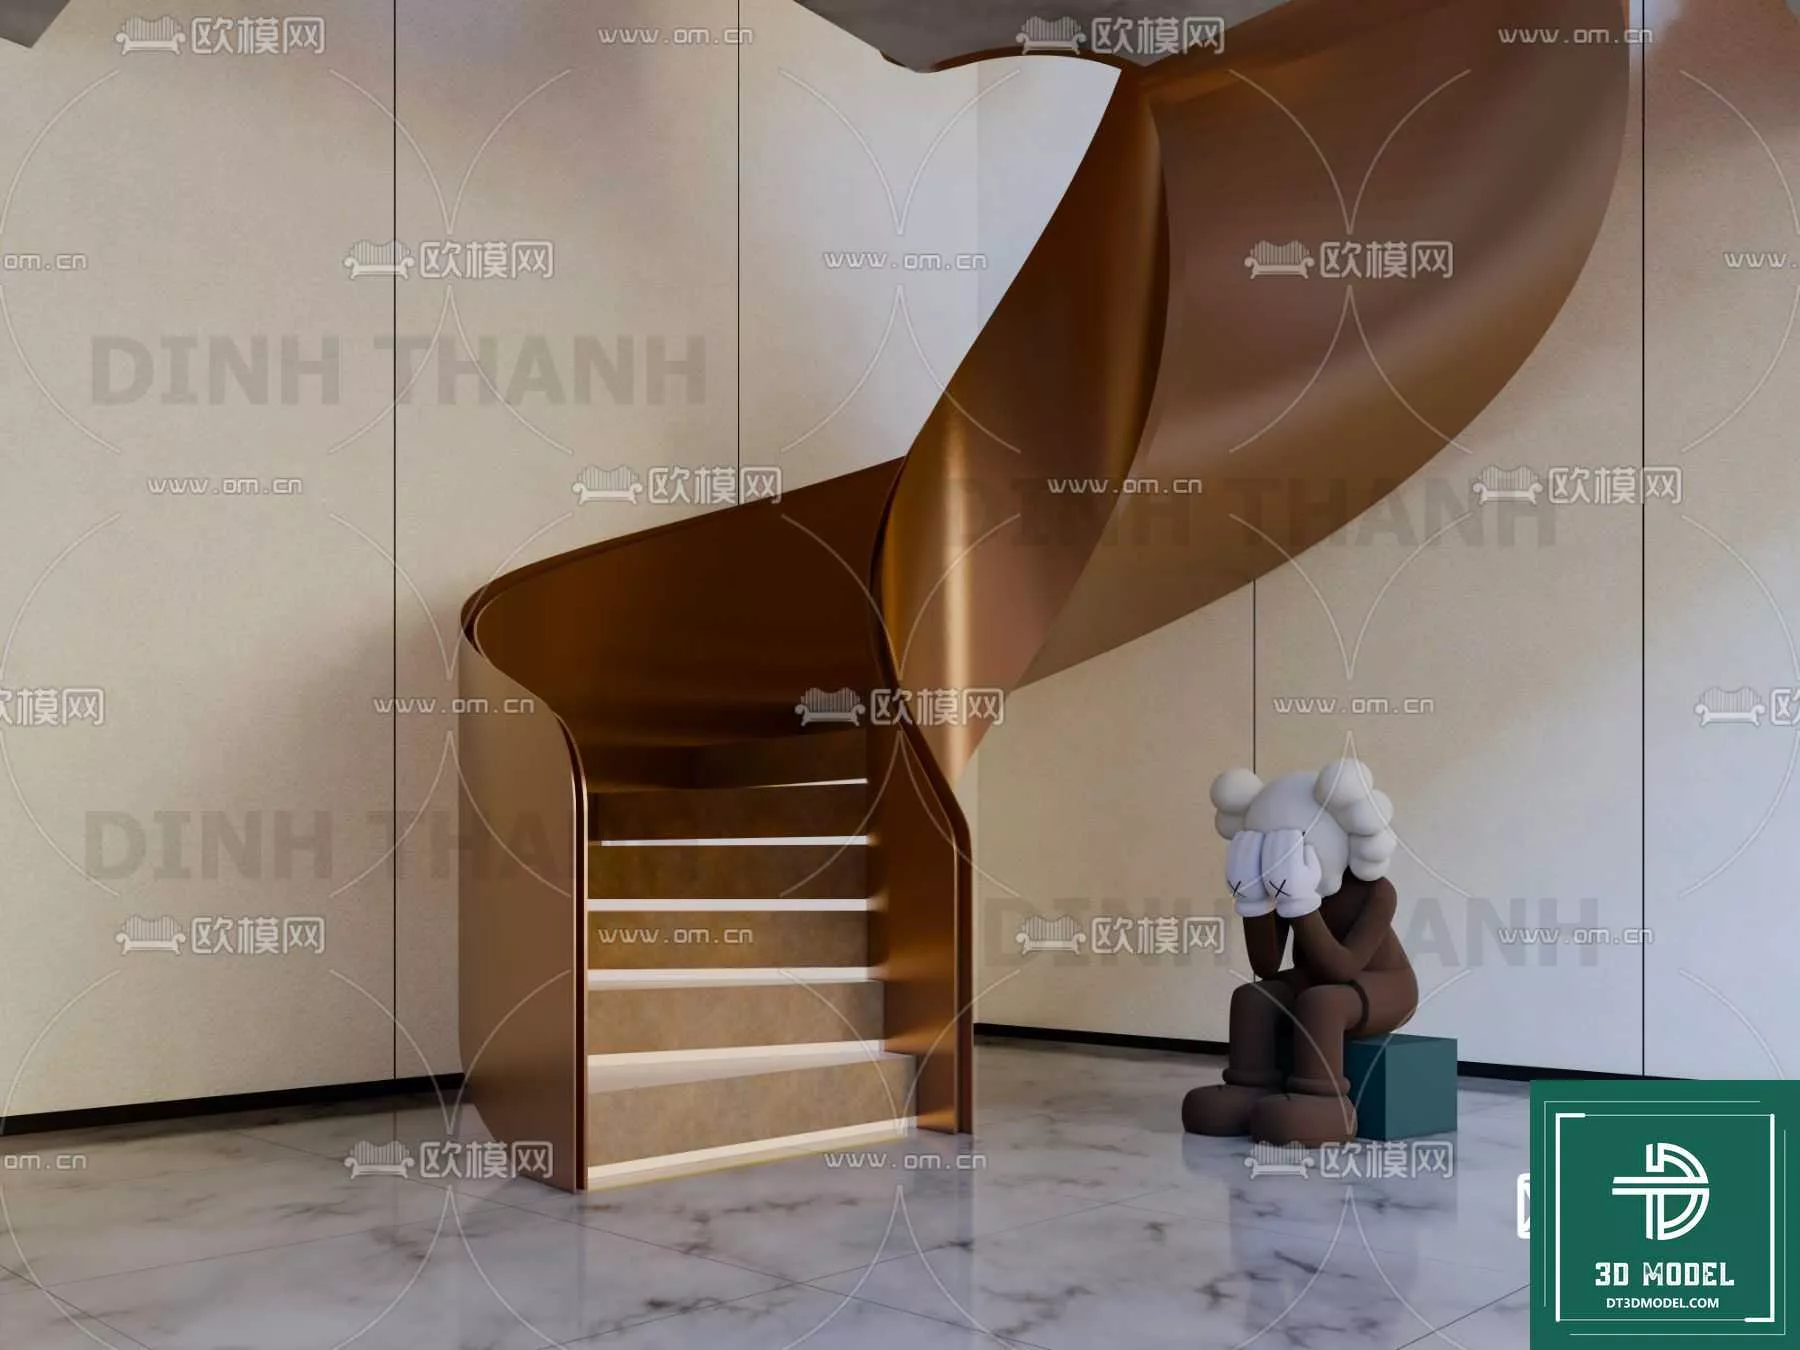 MODERN STAIR - SKETCHUP 3D MODEL - VRAY OR ENSCAPE - ID14159